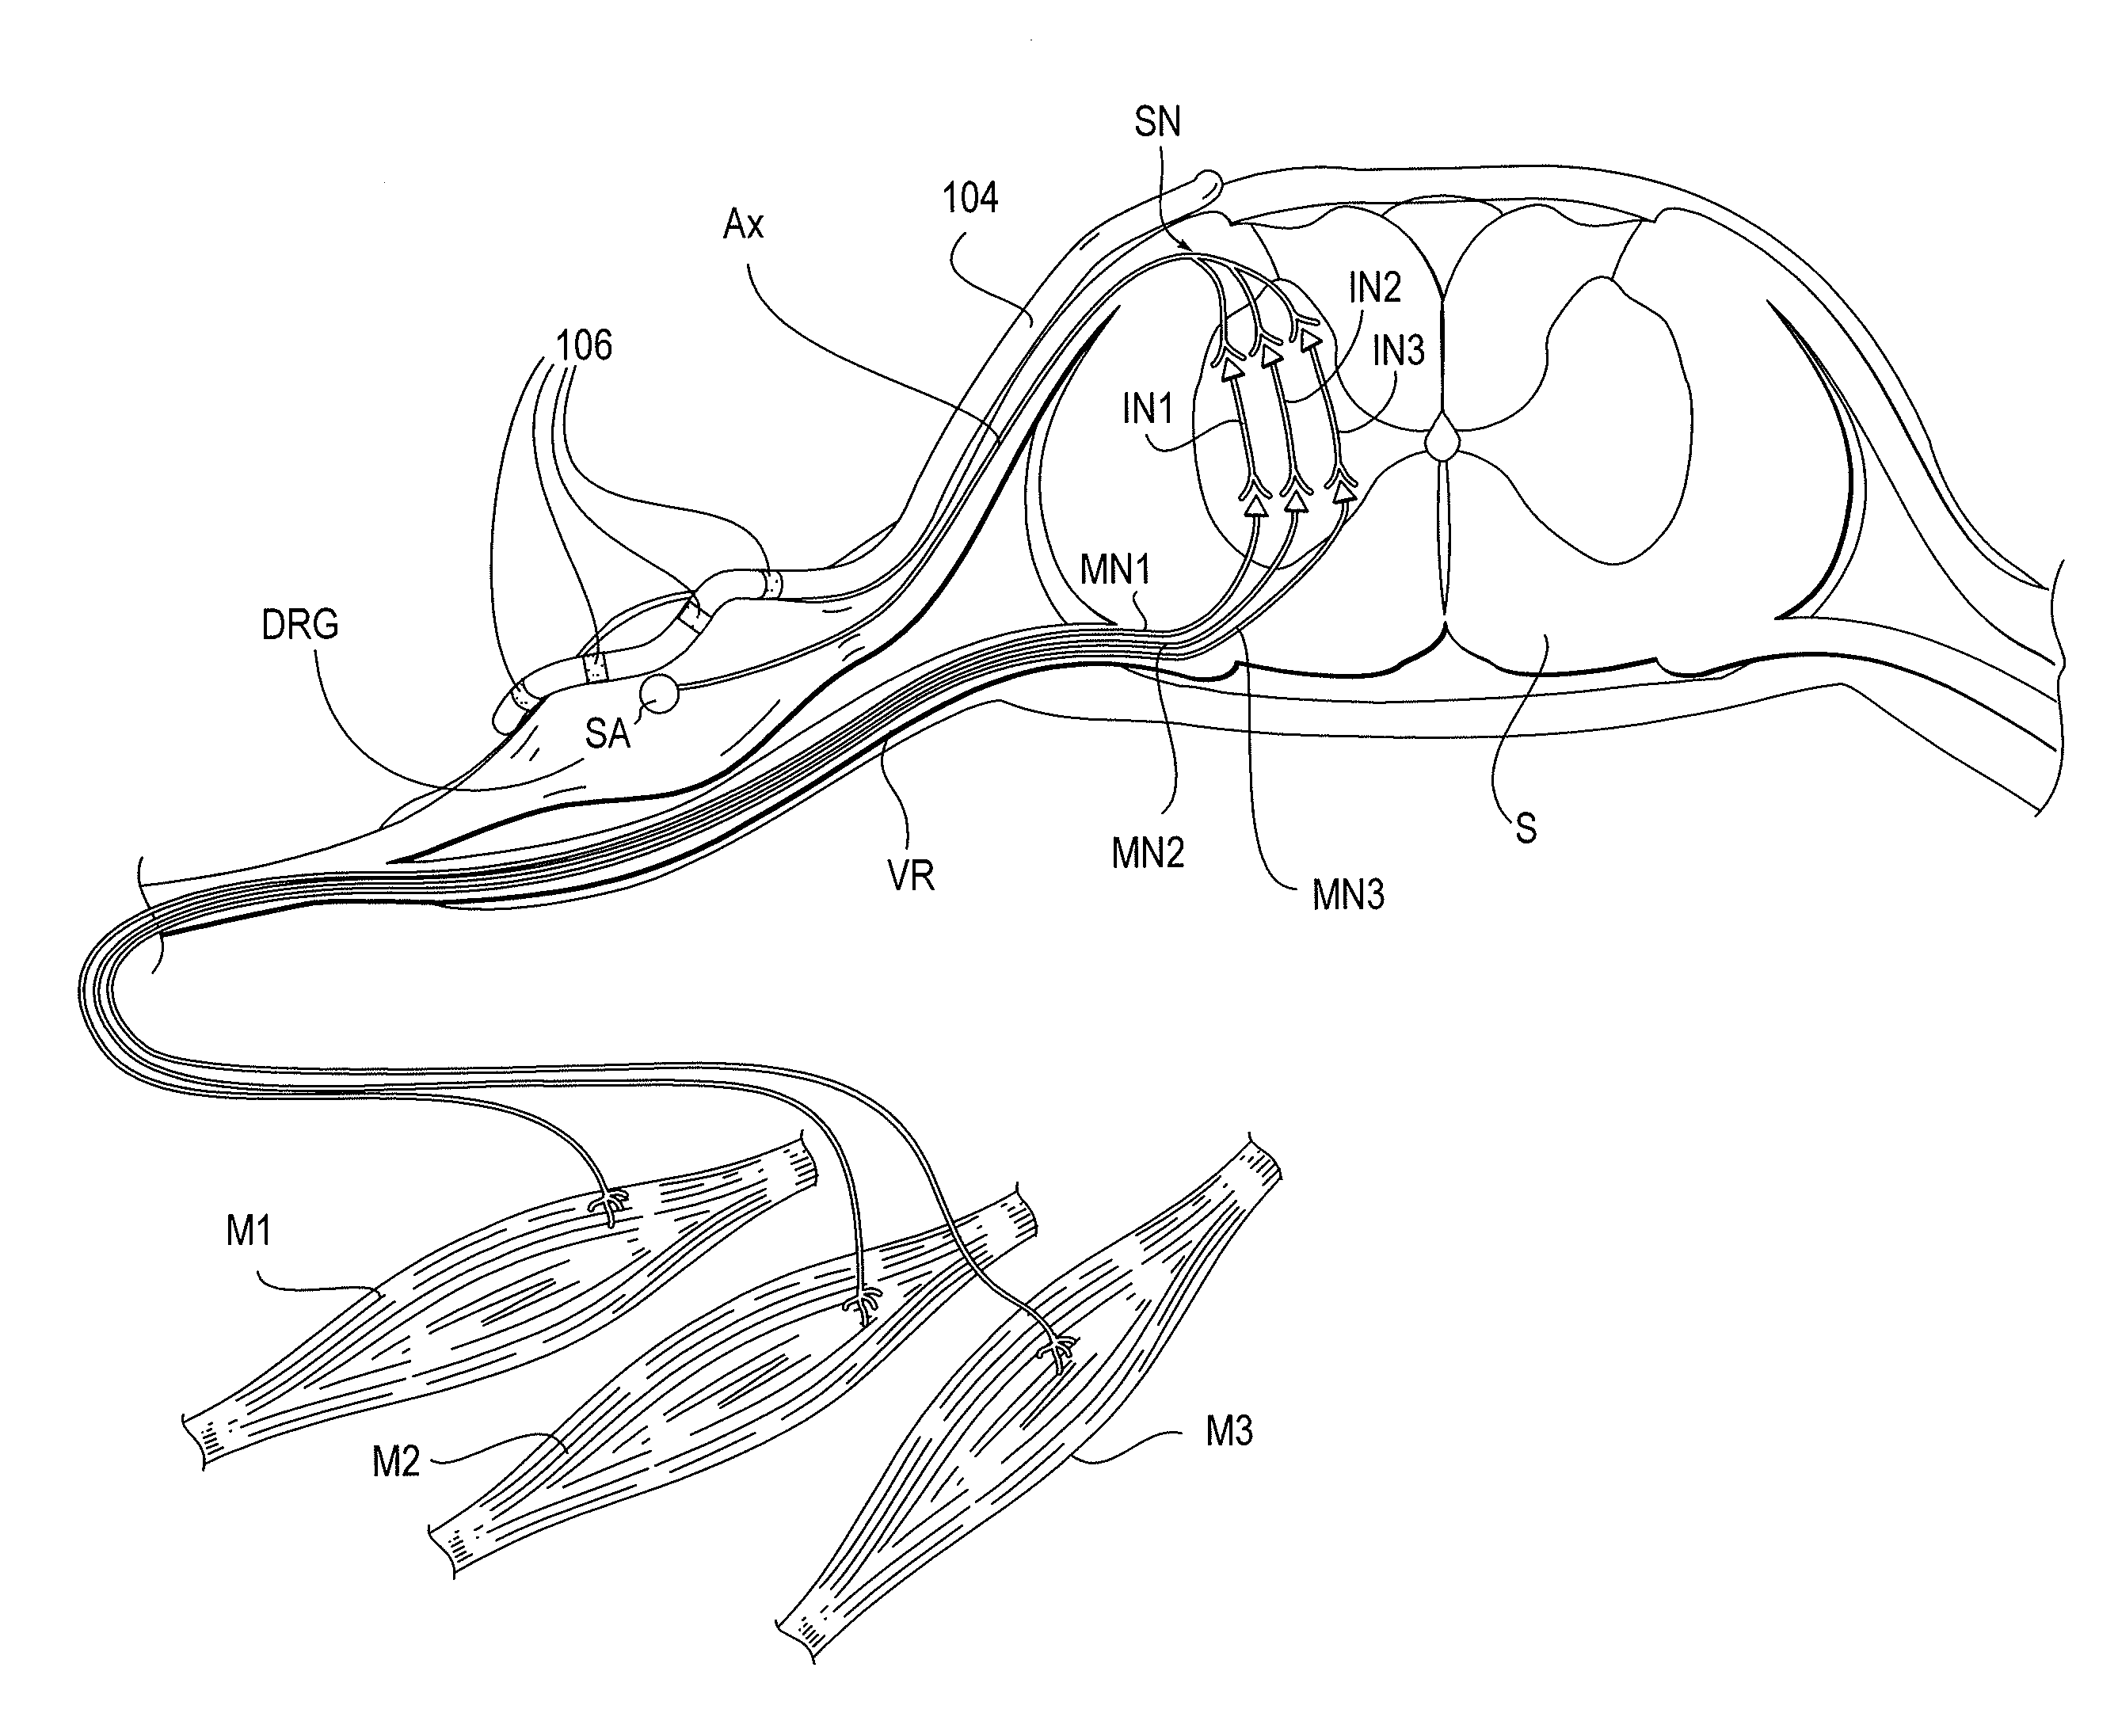 Devices, systems and methods for the targeted treatment of movement disorders